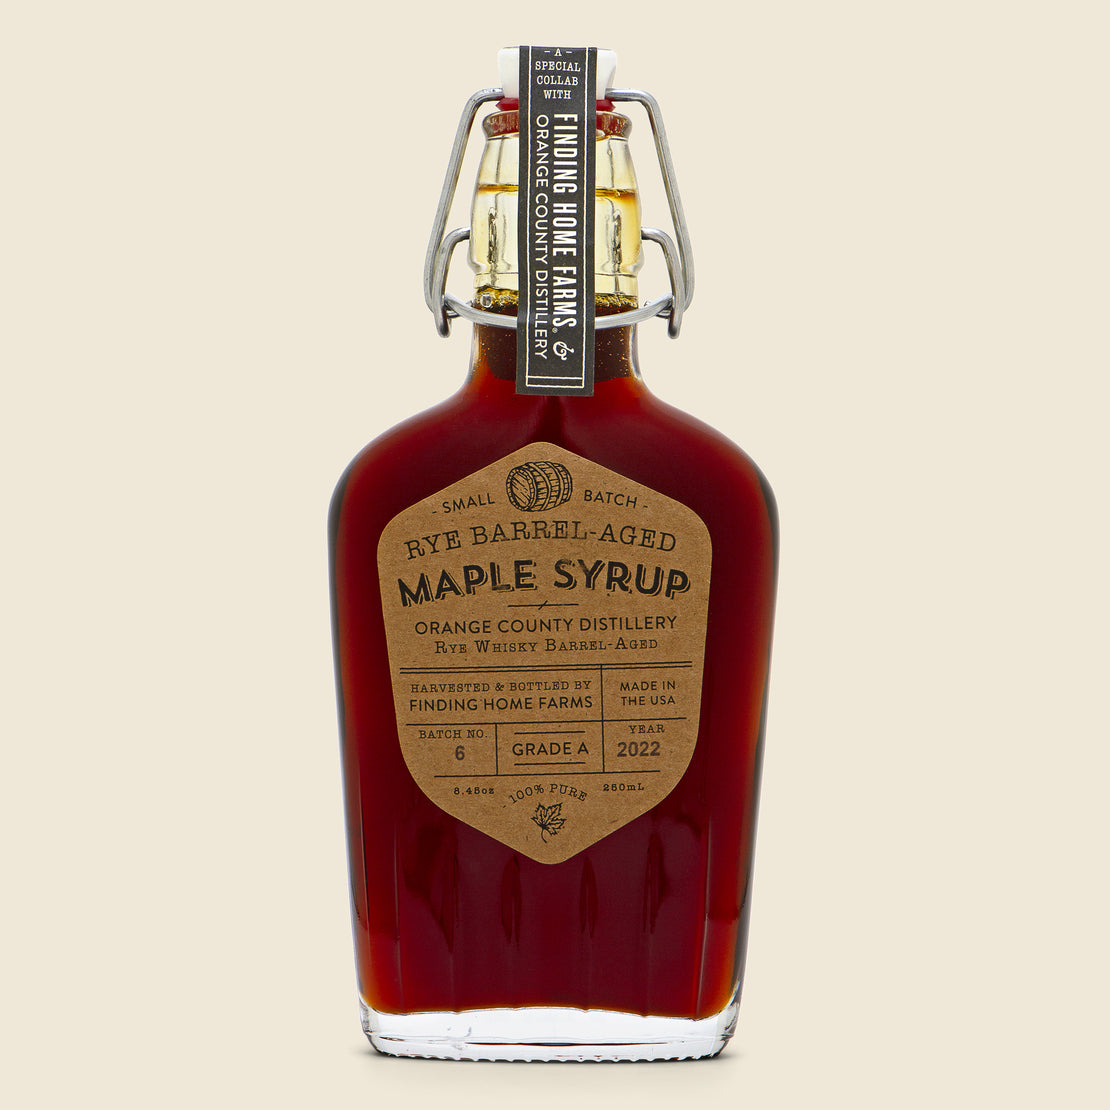 Home Rye Barrel-Aged Maple Syrup